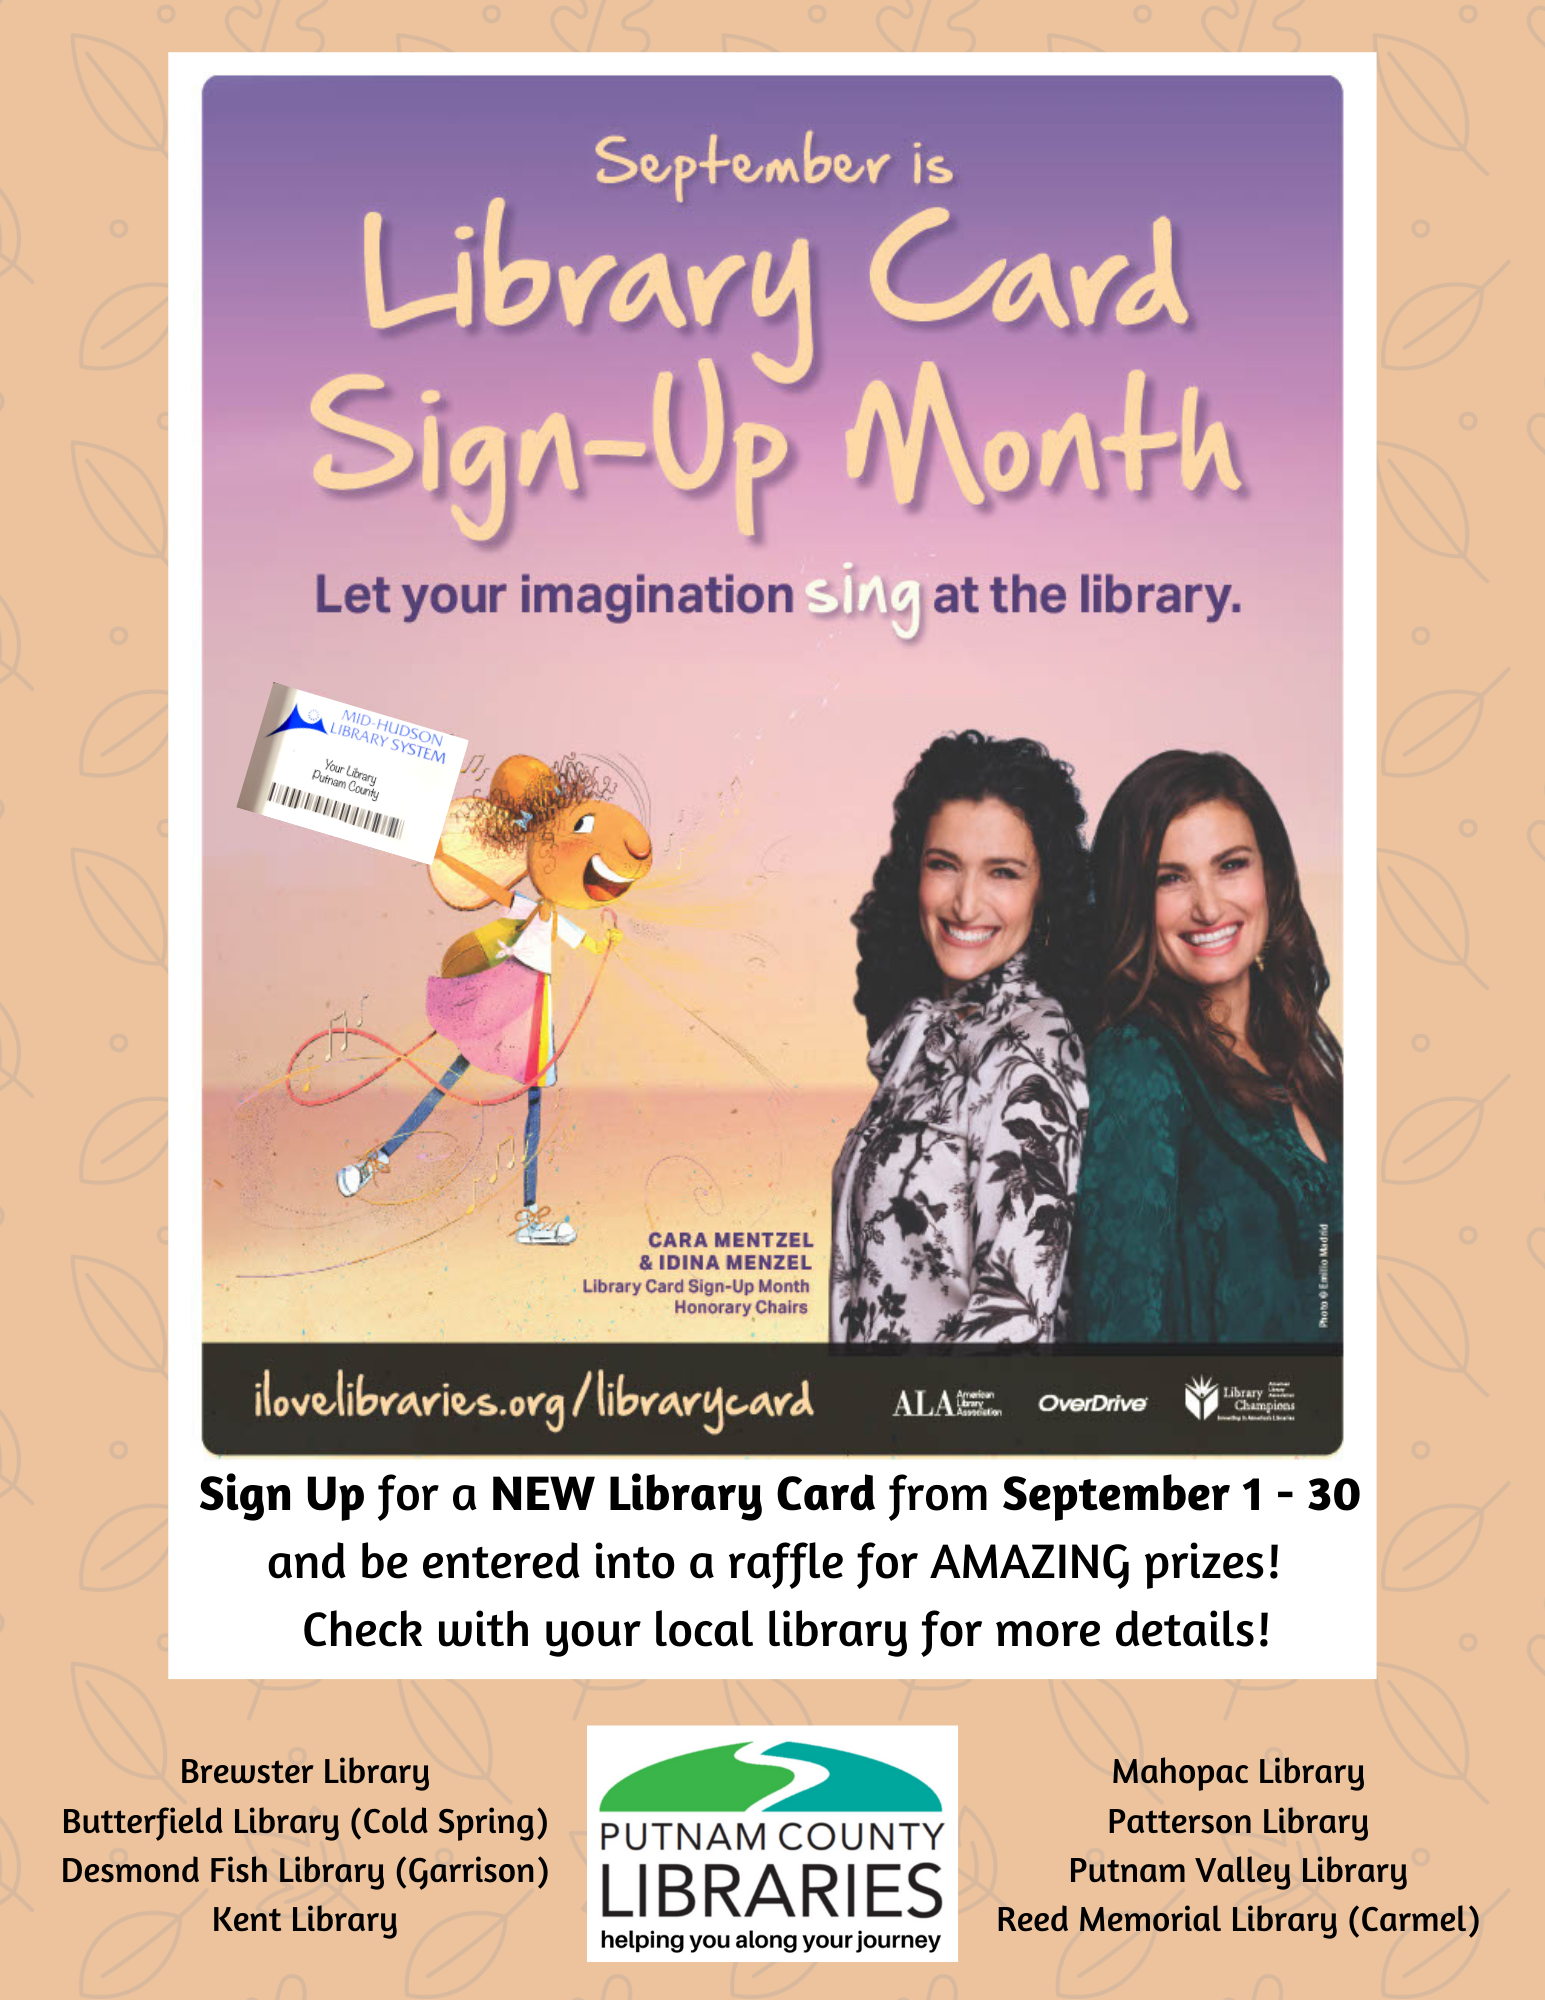 Sign-Up for a new library card from September 1-30 and be entered into a raffle for amazing prizes!